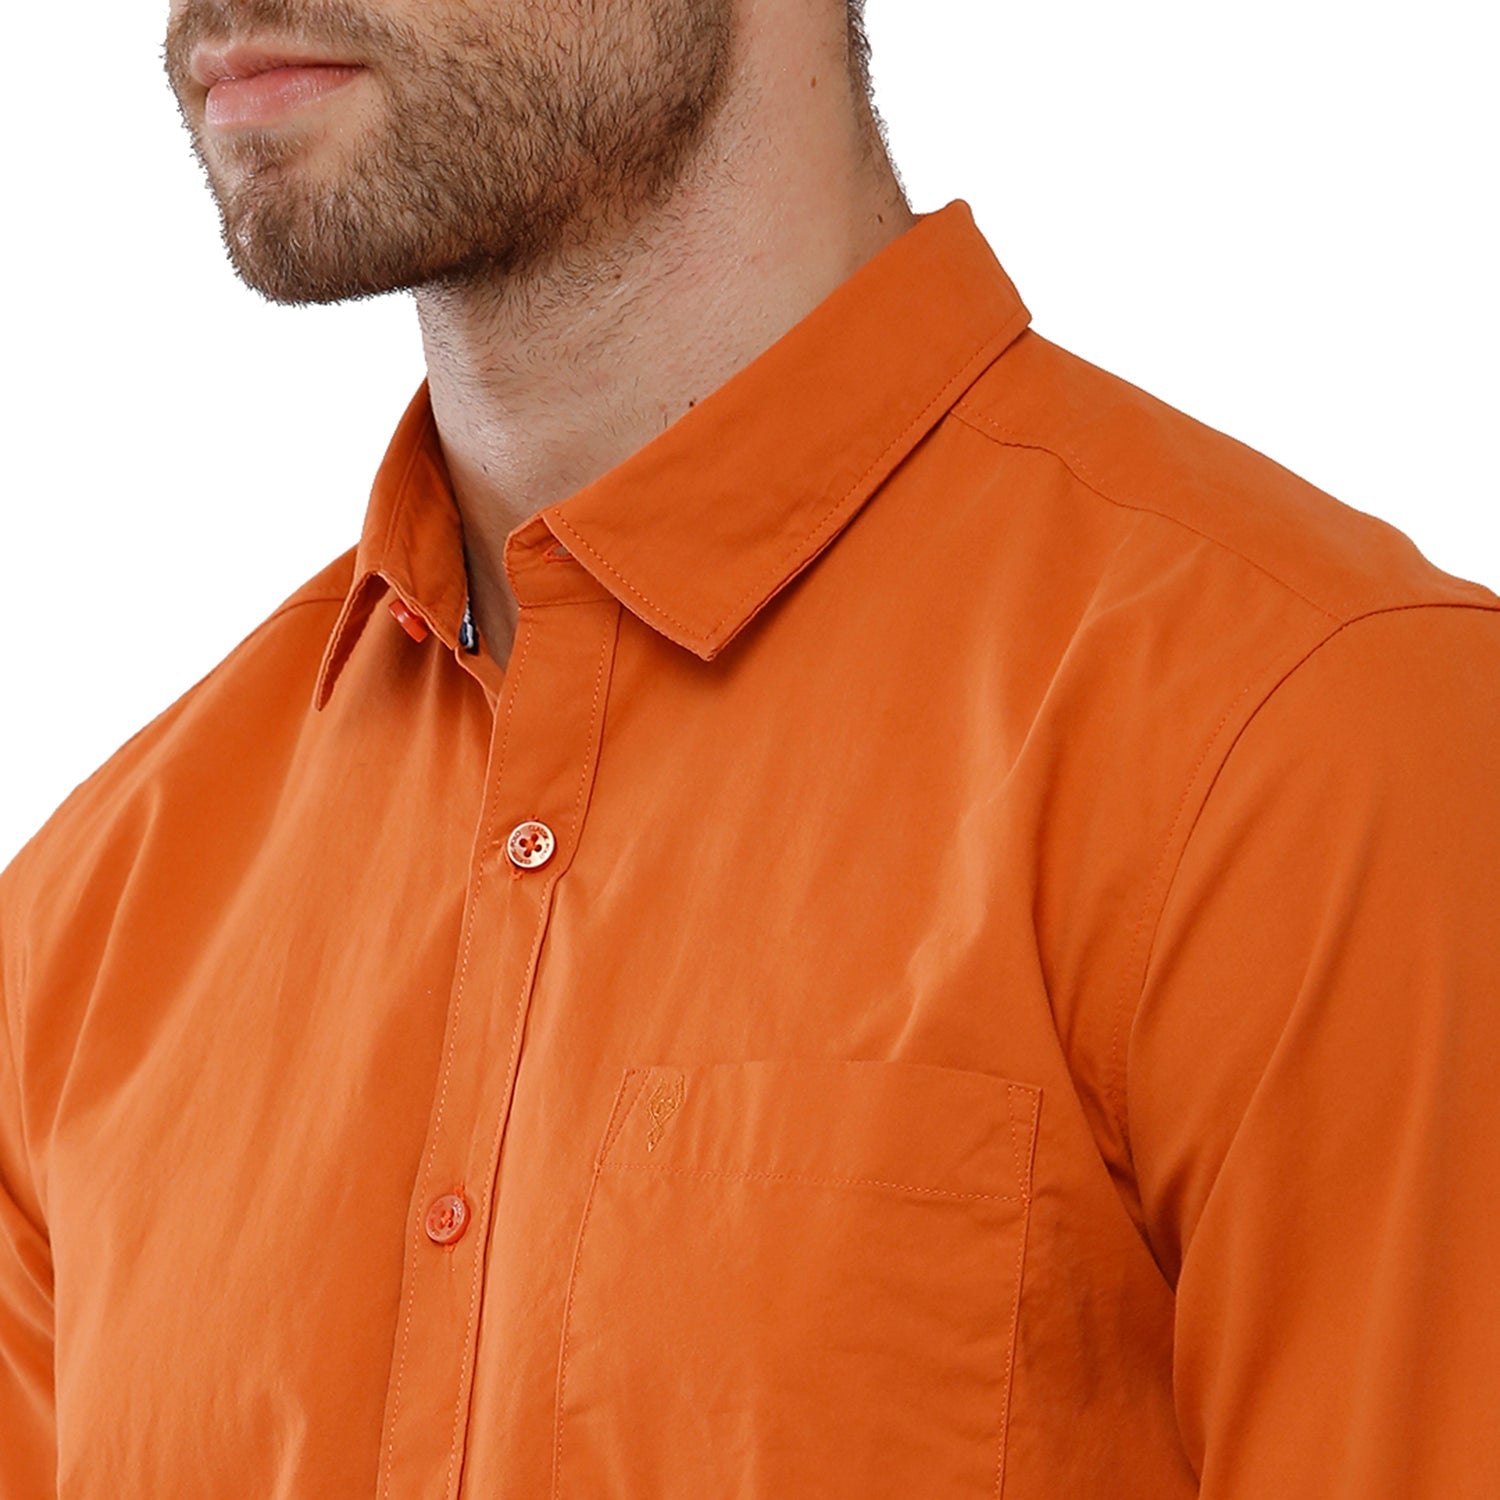 Classic Polo Mens 100% Cotton Full Sleeve Solid Slim Fit Orange Color Woven Shirt -SN1 115 C Shirts Classic Polo 